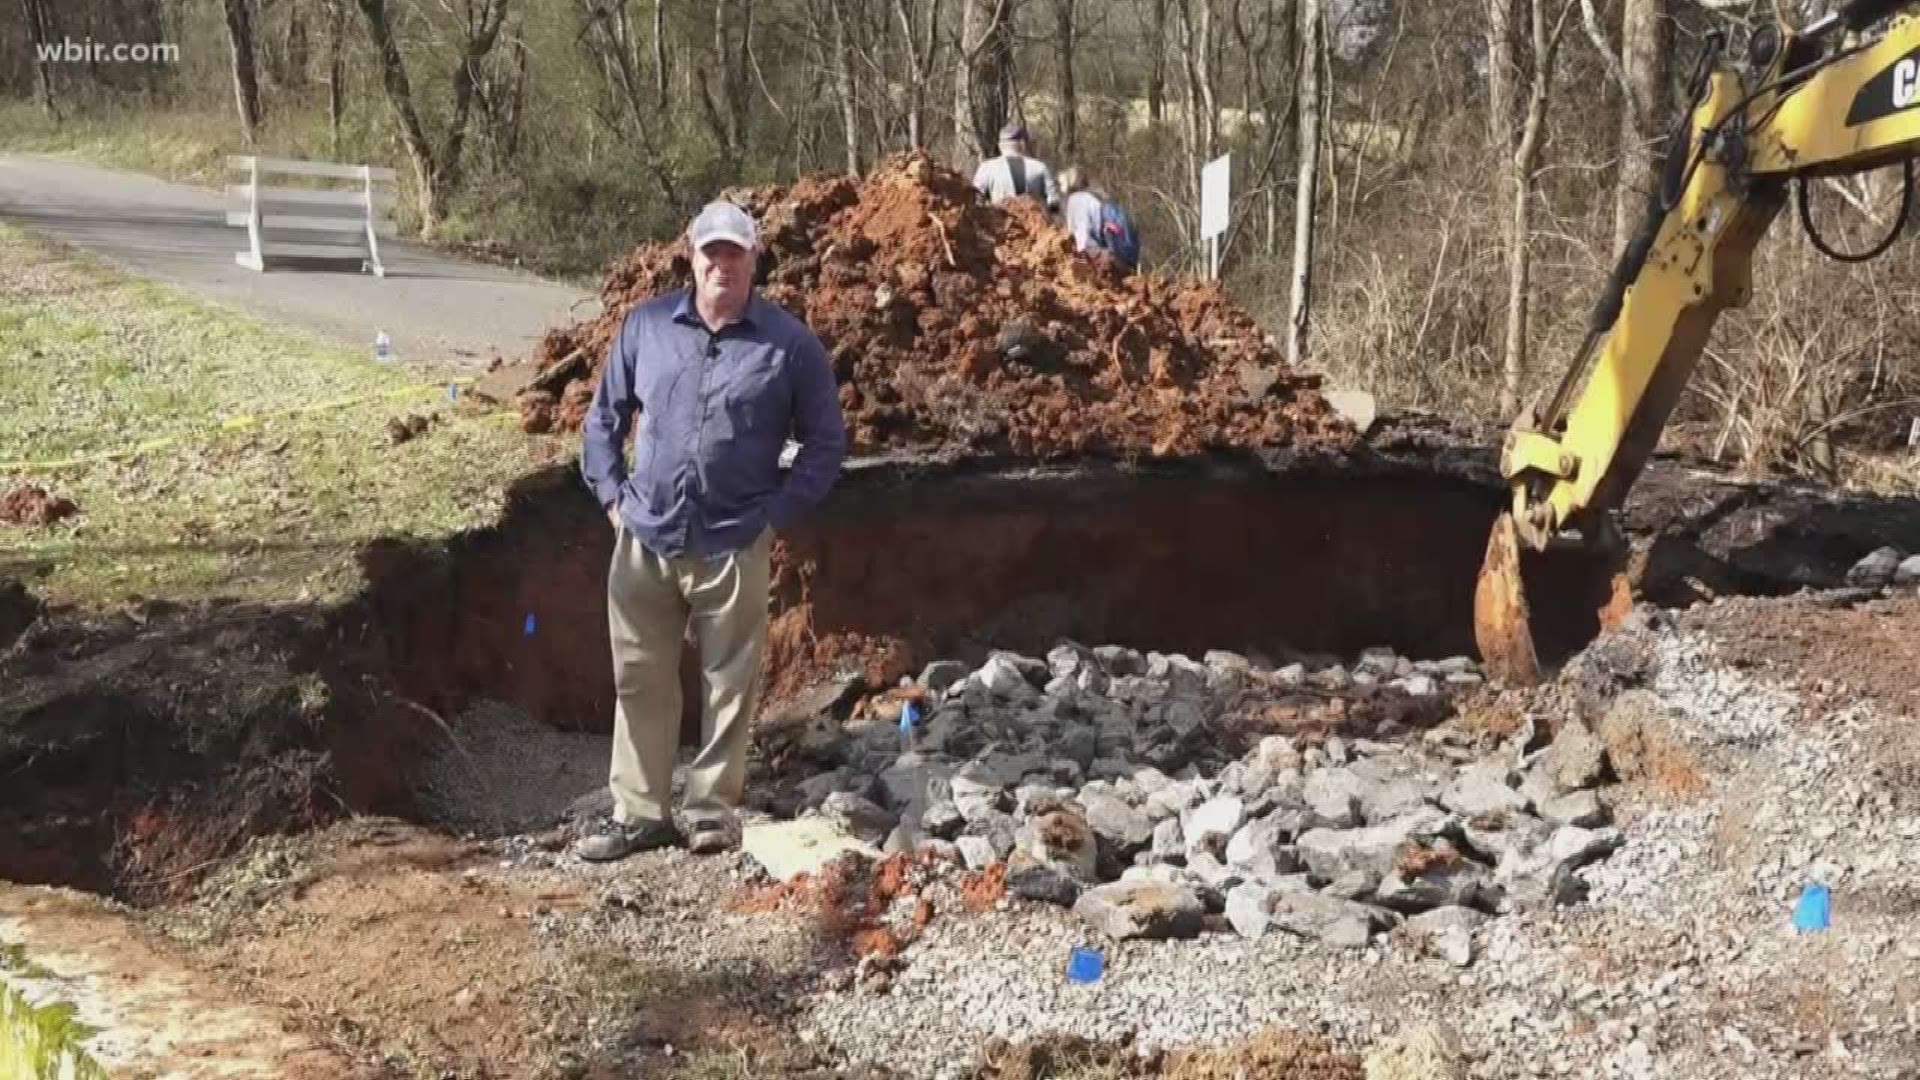 About 25 families were cut off when heavy rains caused a sinkhole on the road leading to their homes.